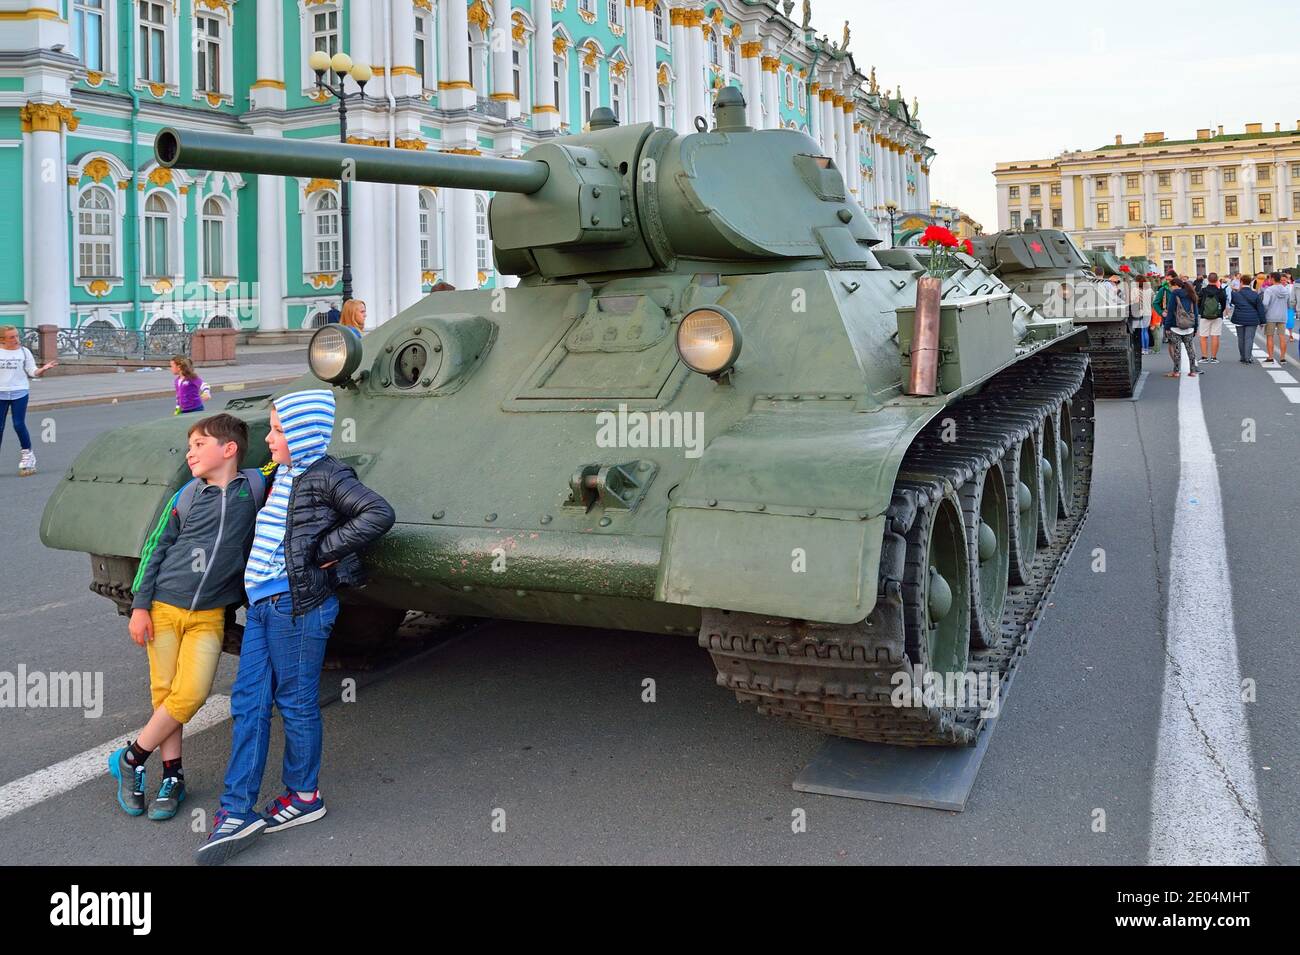 ST.PETERSBURG, RUSSIA - AUGUST 08, 2017: The children photographed on the background of Soviet heavy tank KV-1 on the background of the Winter Palace Stock Photo